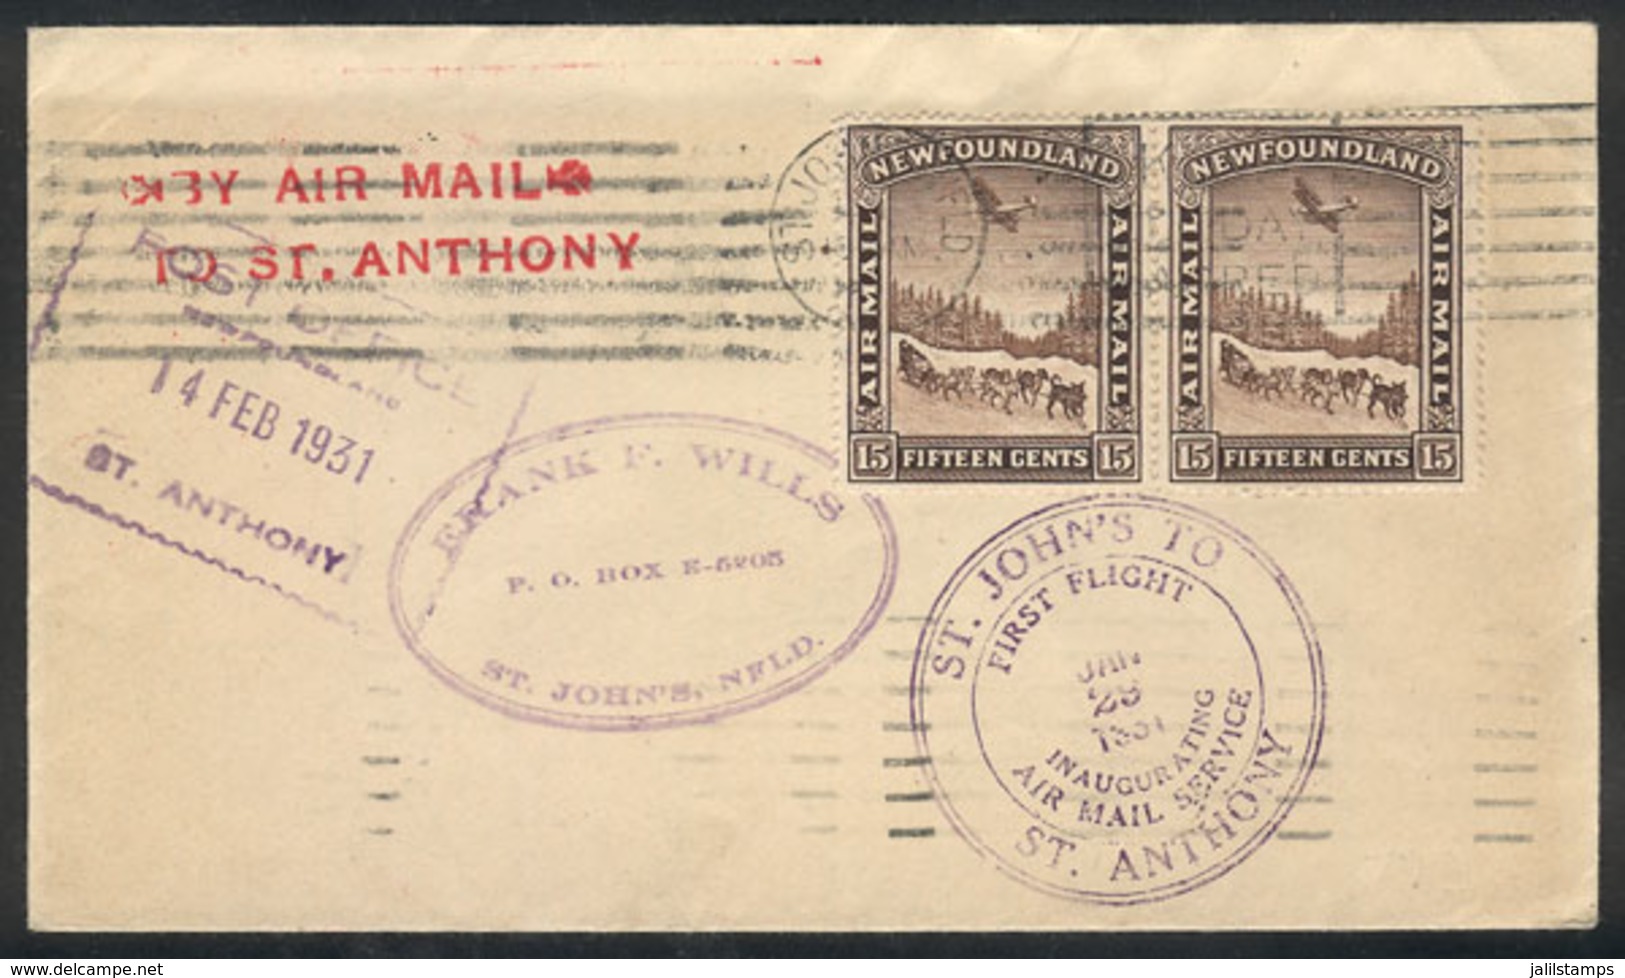 CANADA - NEWFOUNDLAND: 29/JA/1931 St. John's - St. Anthony: First Flight, With Special Handstamp And Arrival Mark, Very  - 1908-1947